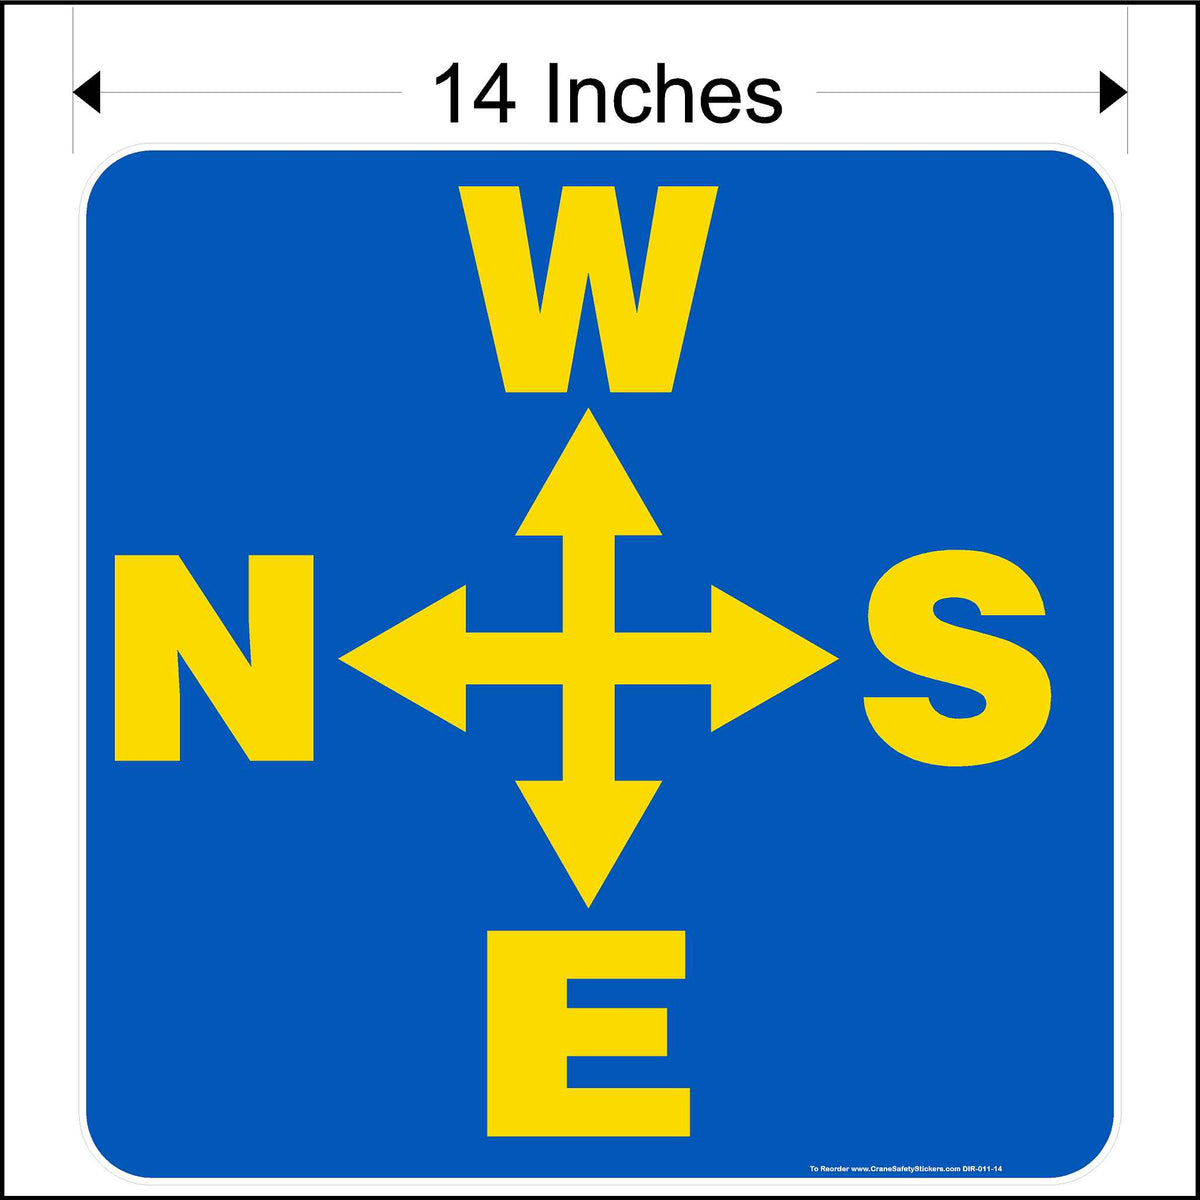 14 Inch overhead crane directional decal. This decal is placed on the side of the crane and has west, south, east, and north arrows printed in yellow on a blue background.